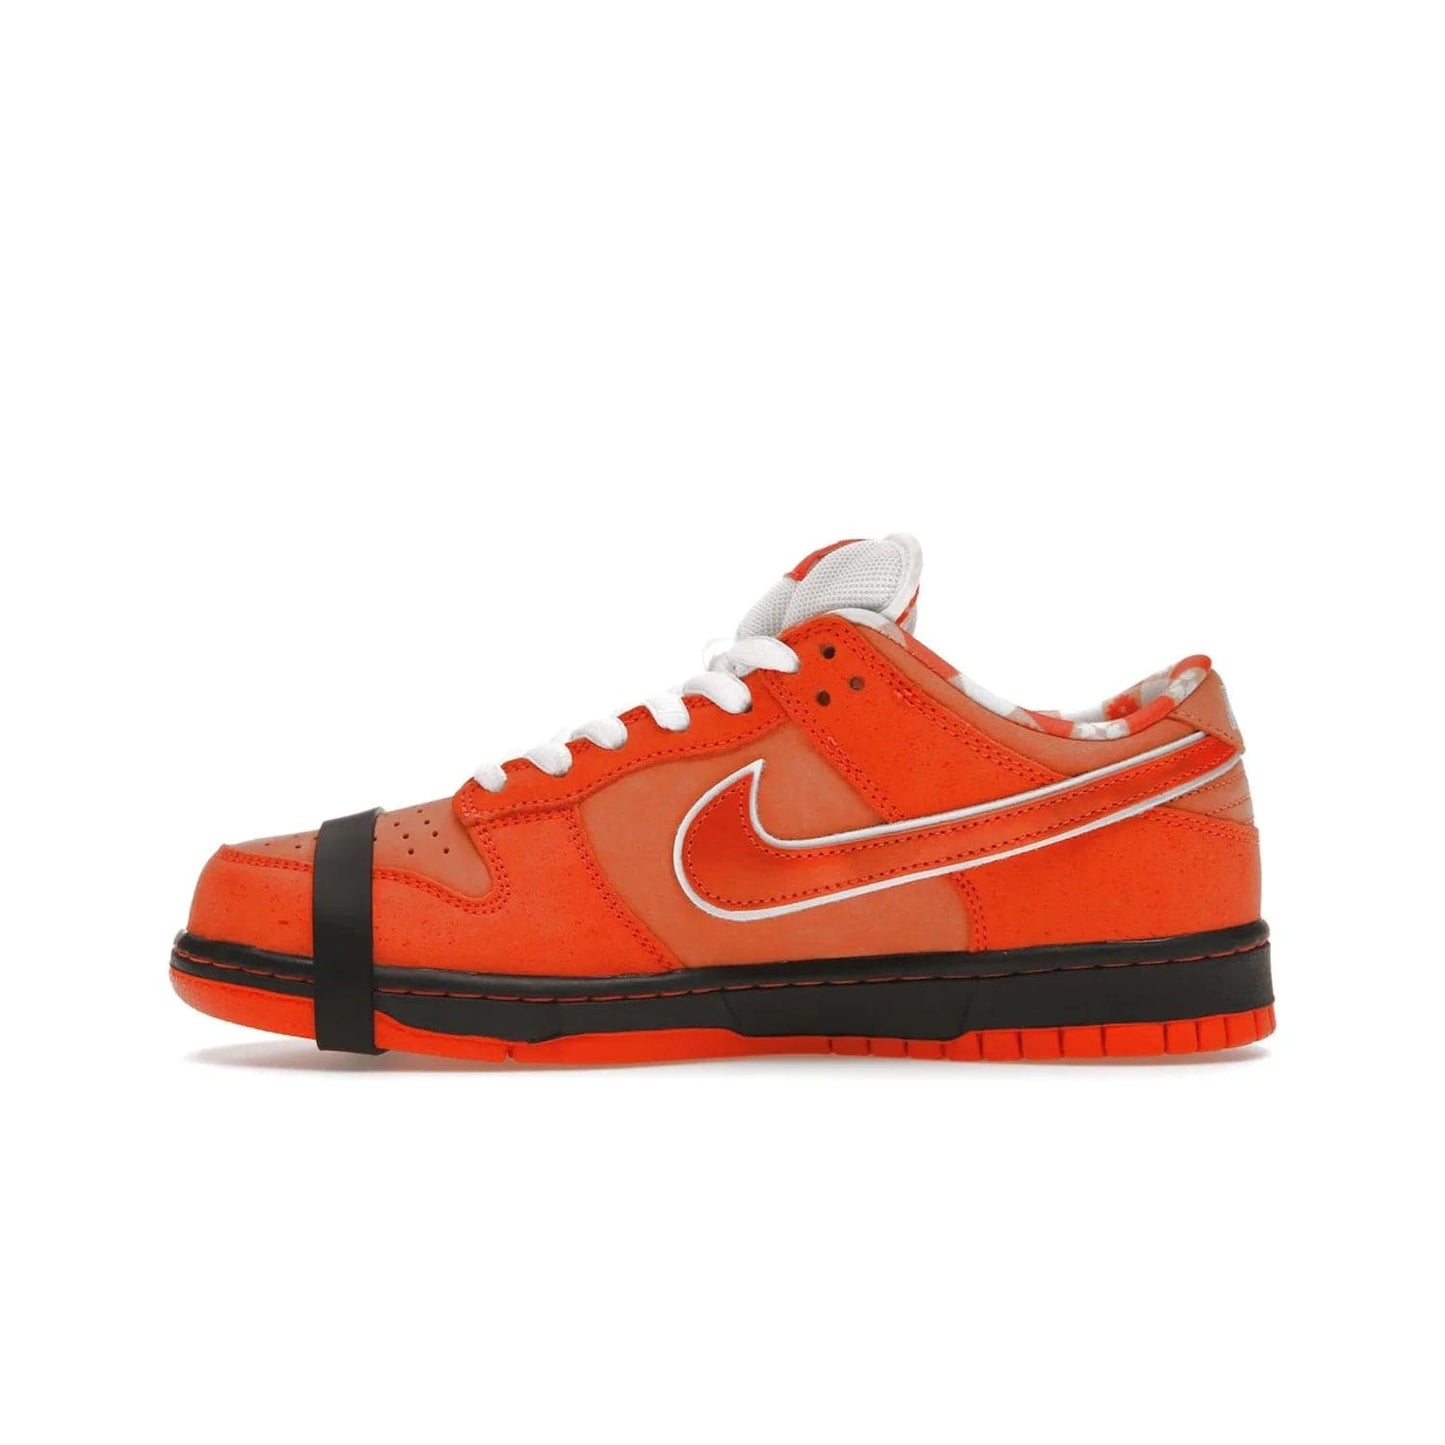 Nike SB Dunk Low Concepts Orange Lobster - Image 19 - Only at www.BallersClubKickz.com - Make a statement with the Nike SB Dunk Low Concepts Orange Lobster. Variety of orange hues, nubuck upper, bib-inspired lining & rubber outsole create bold look & comfortable blend of style. Available December 20th, 2022.